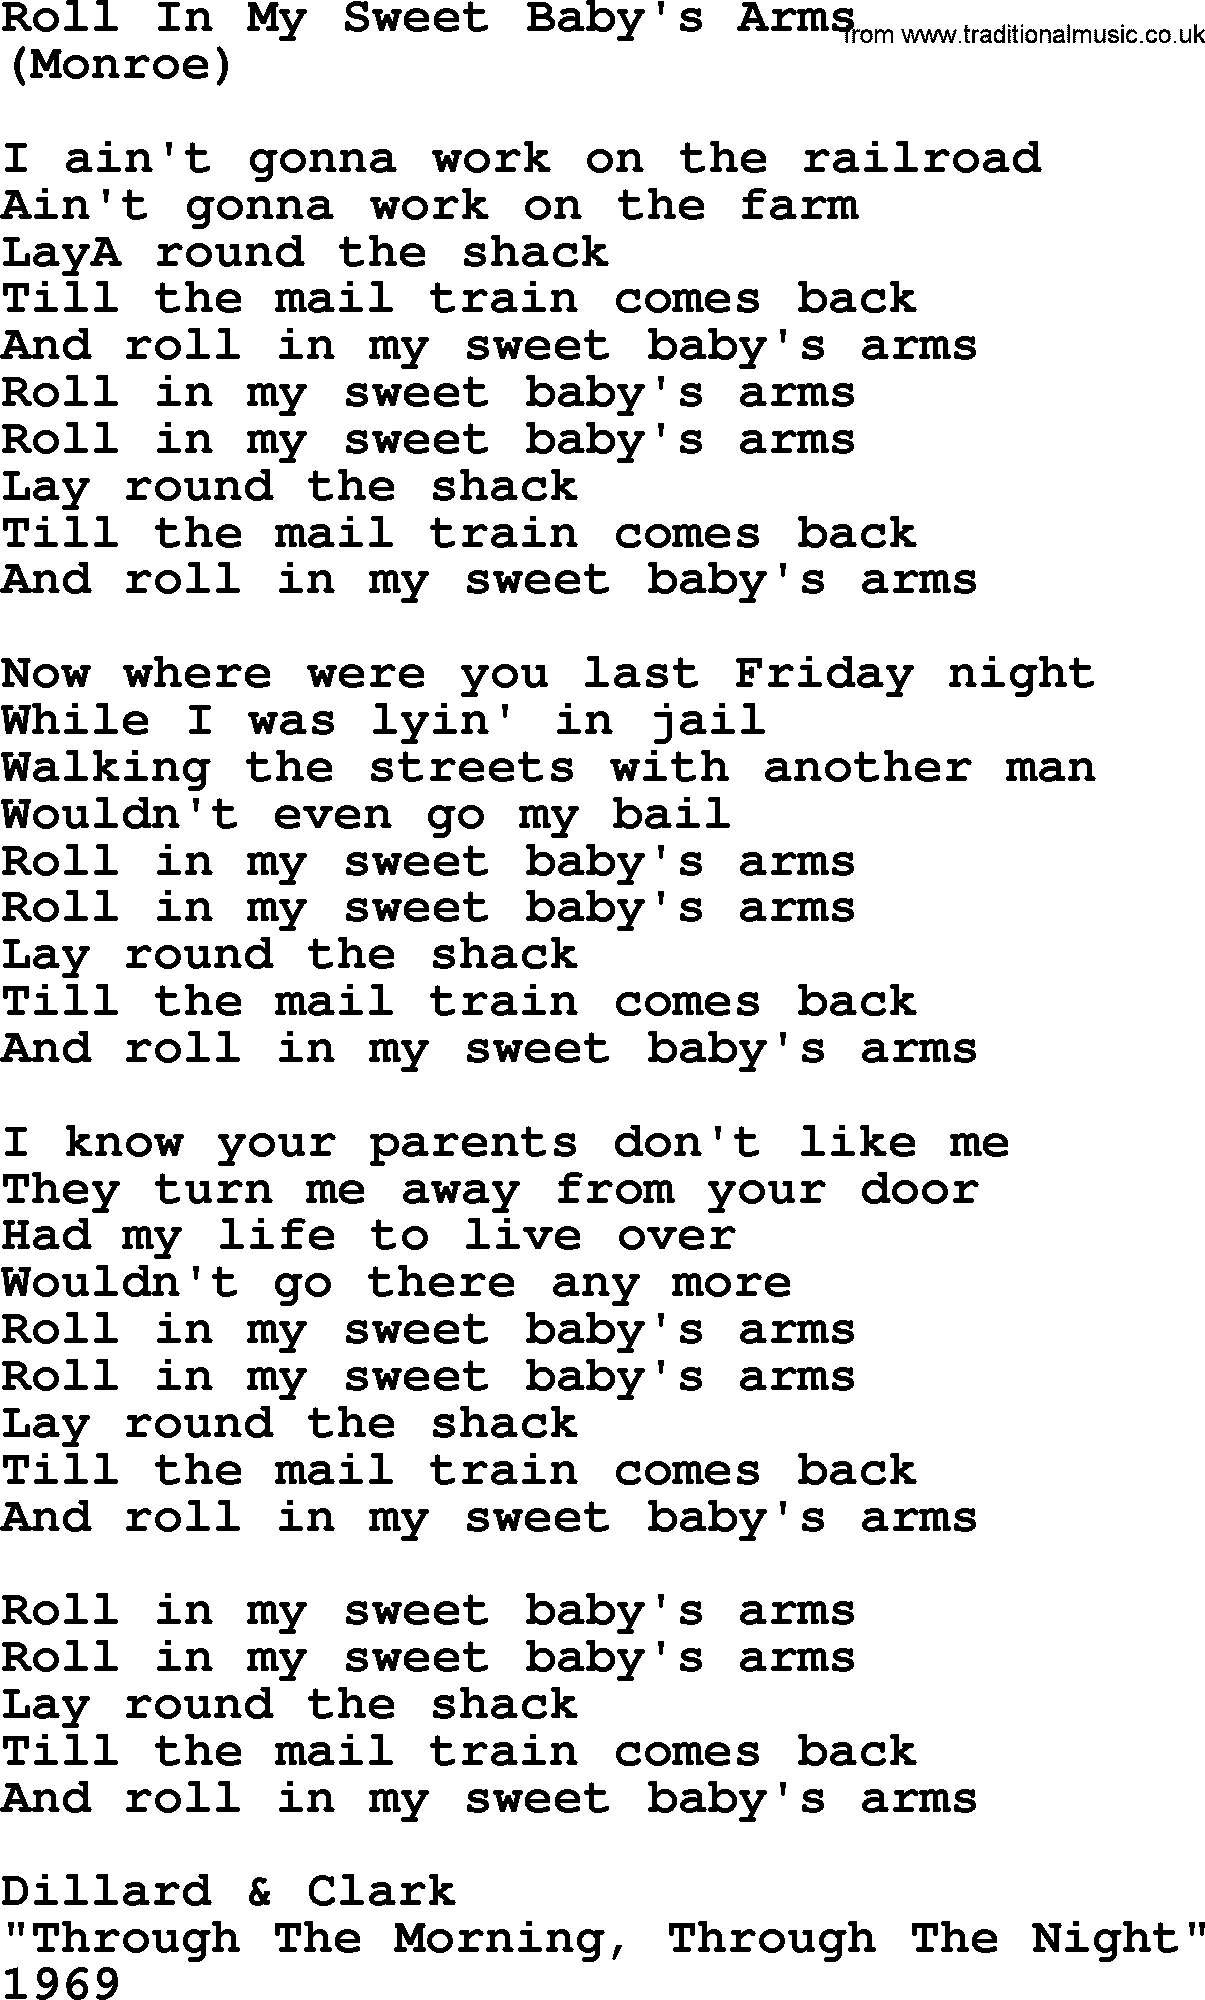 The Byrds song Roll In My Sweet Baby's Arms, lyrics